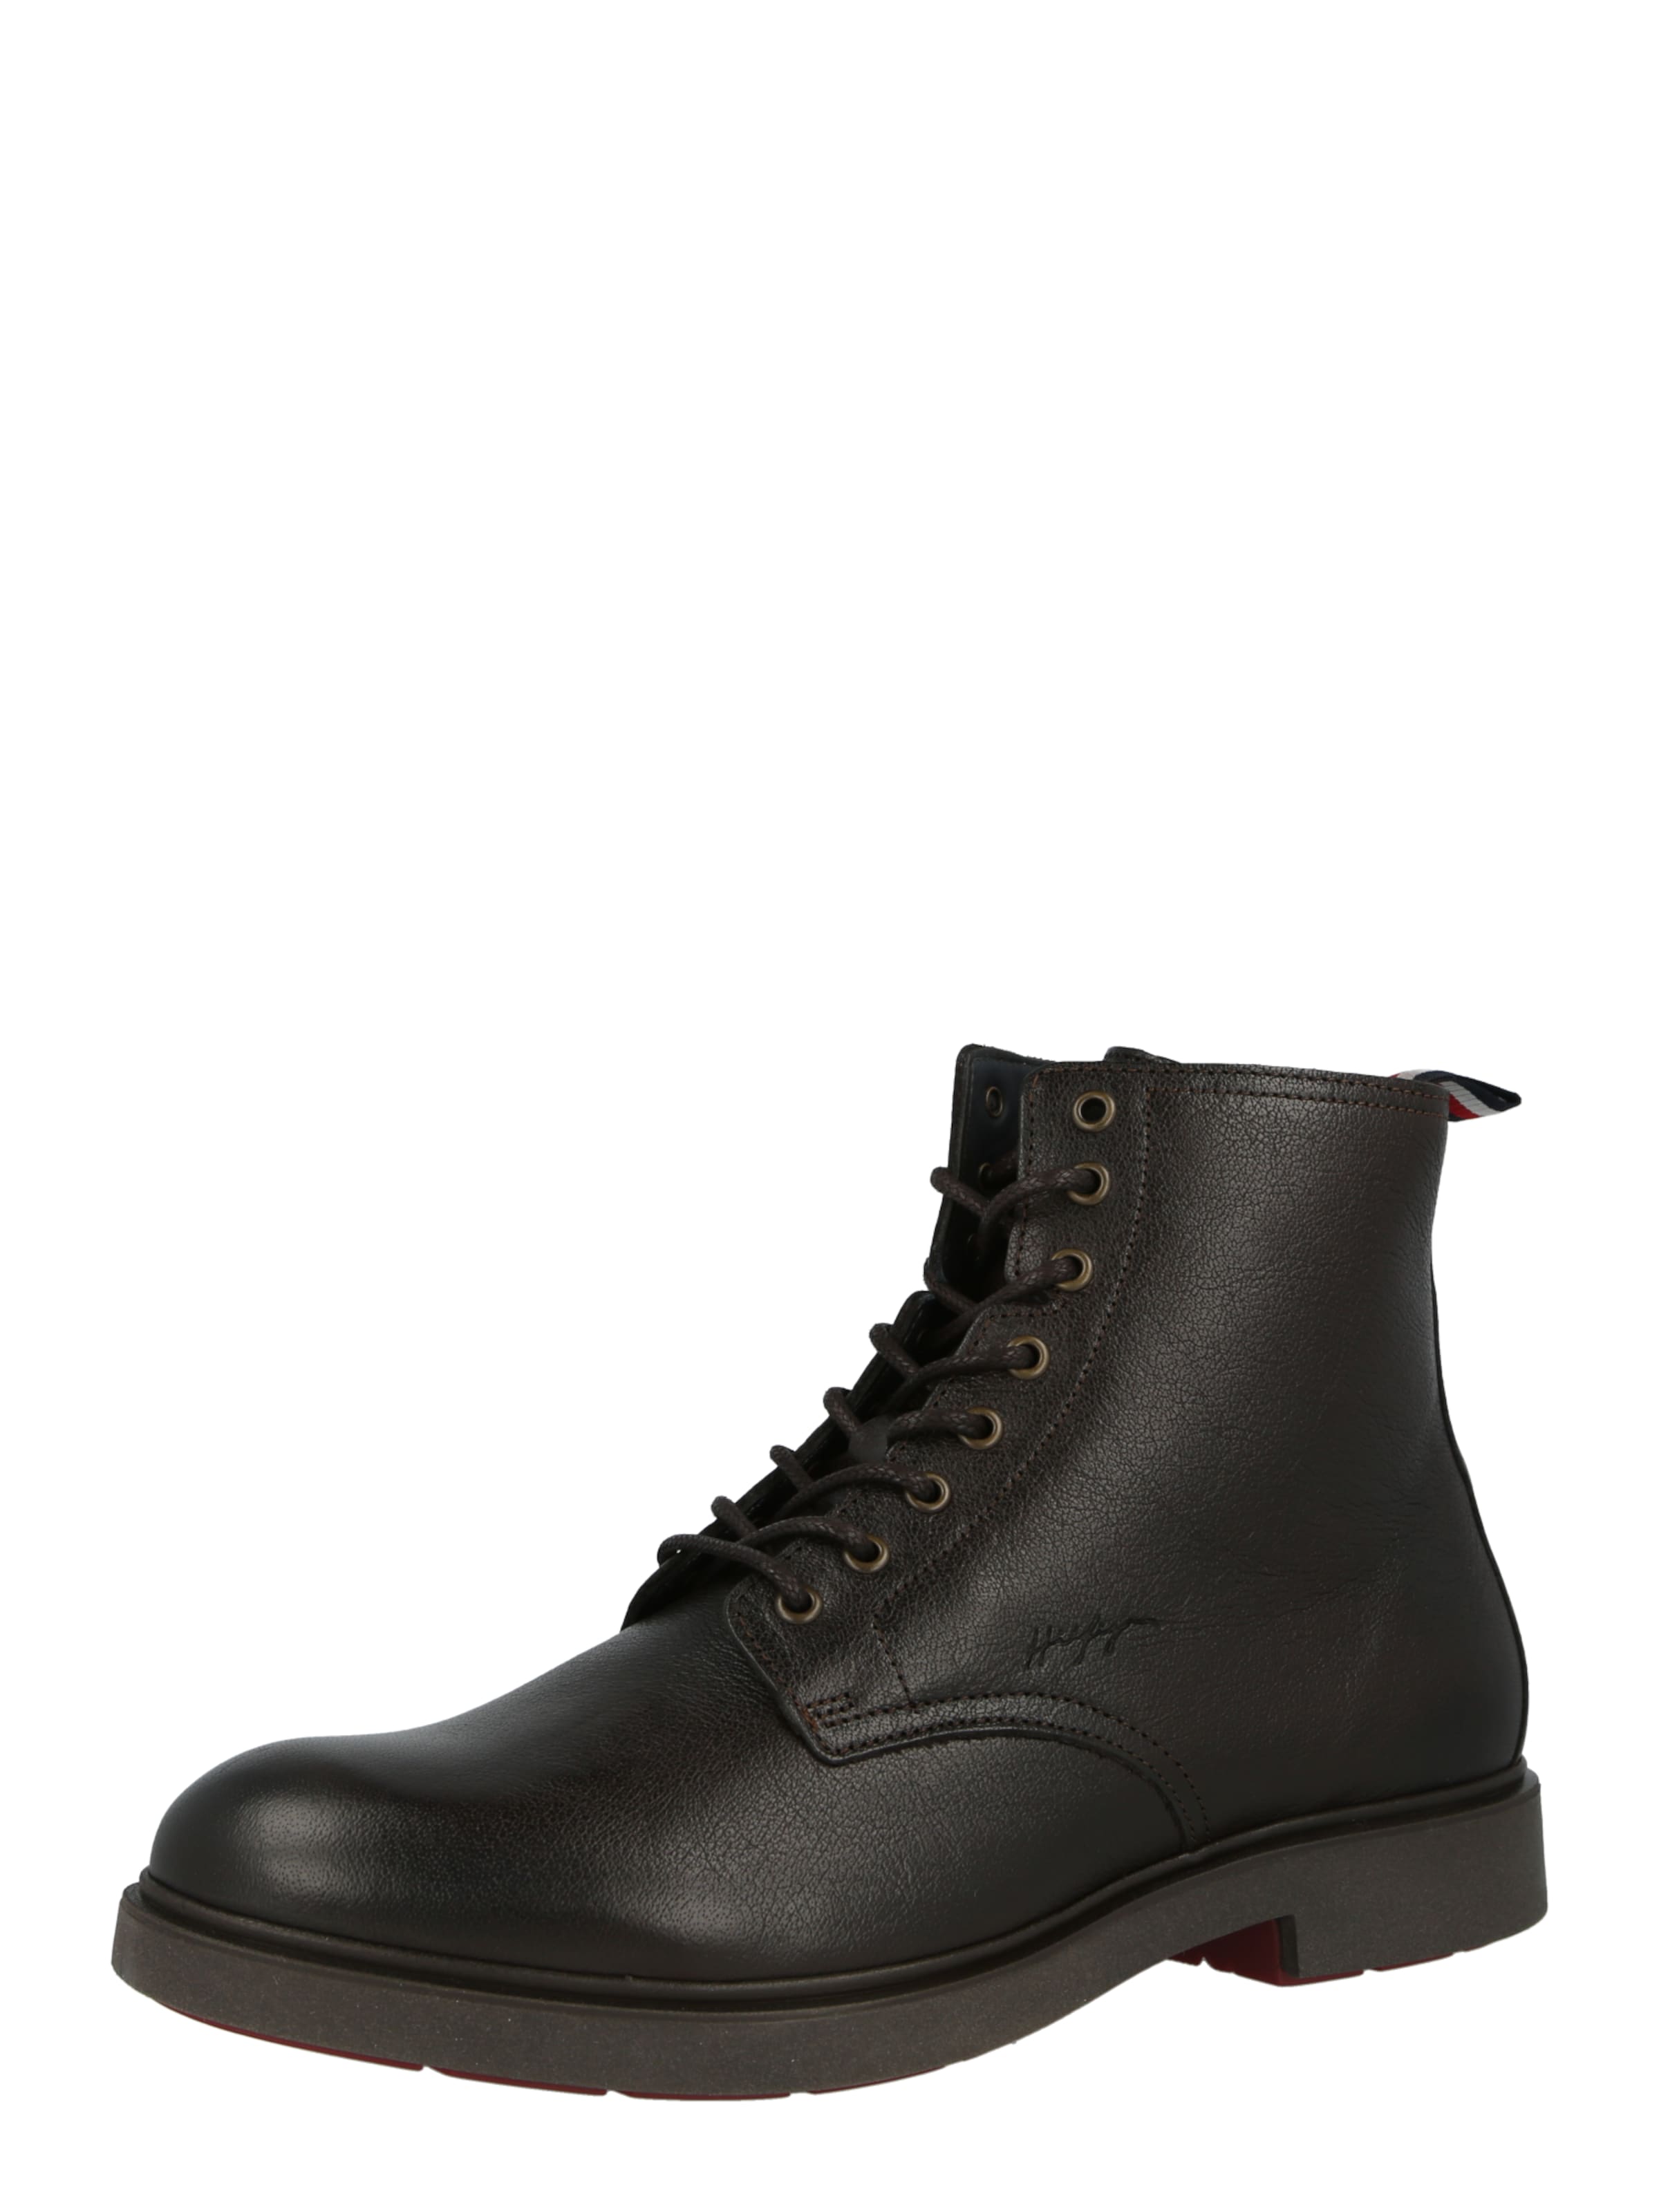 Men Boots | TOMMY HILFIGER Lace-Up Boots in Dark Brown - NE02379